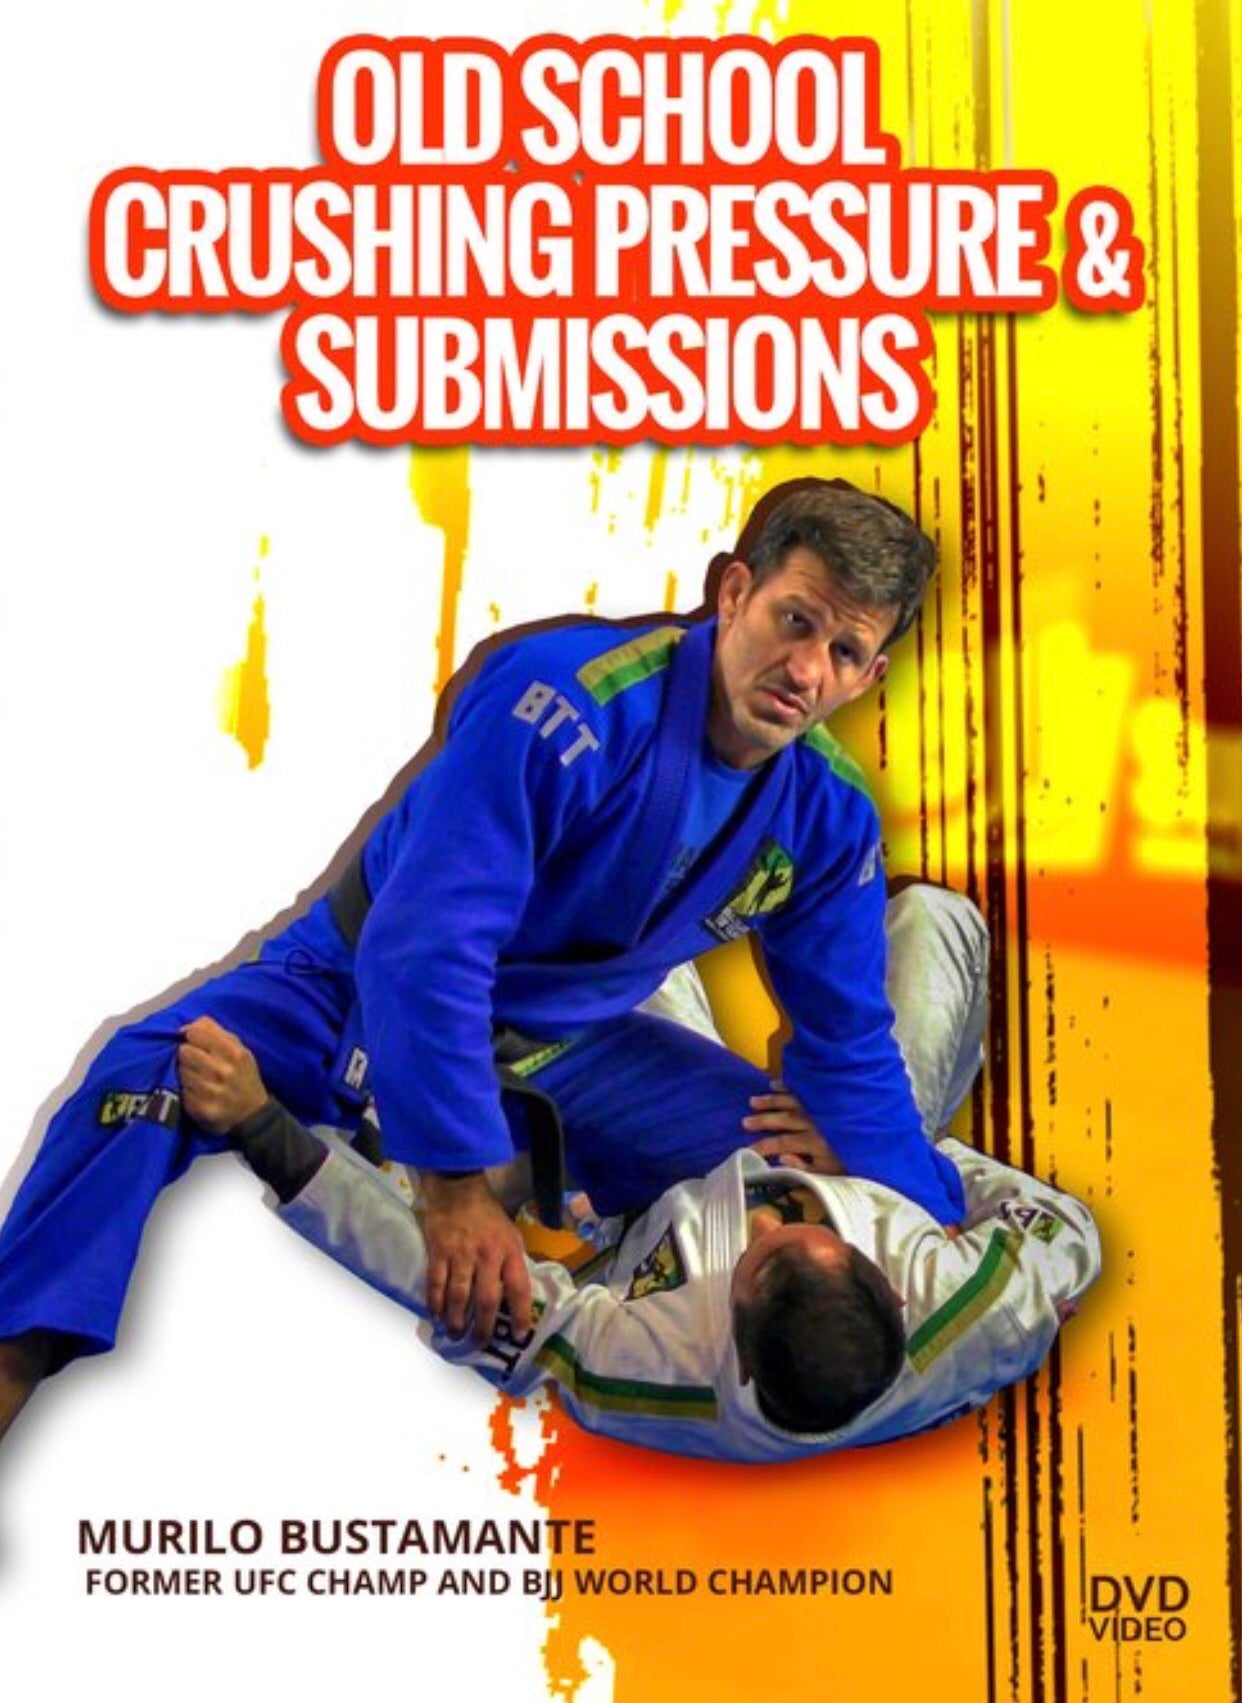 Old School Crushing Pressure & Submissions 2 DVD Set by Murilo Bustamonte